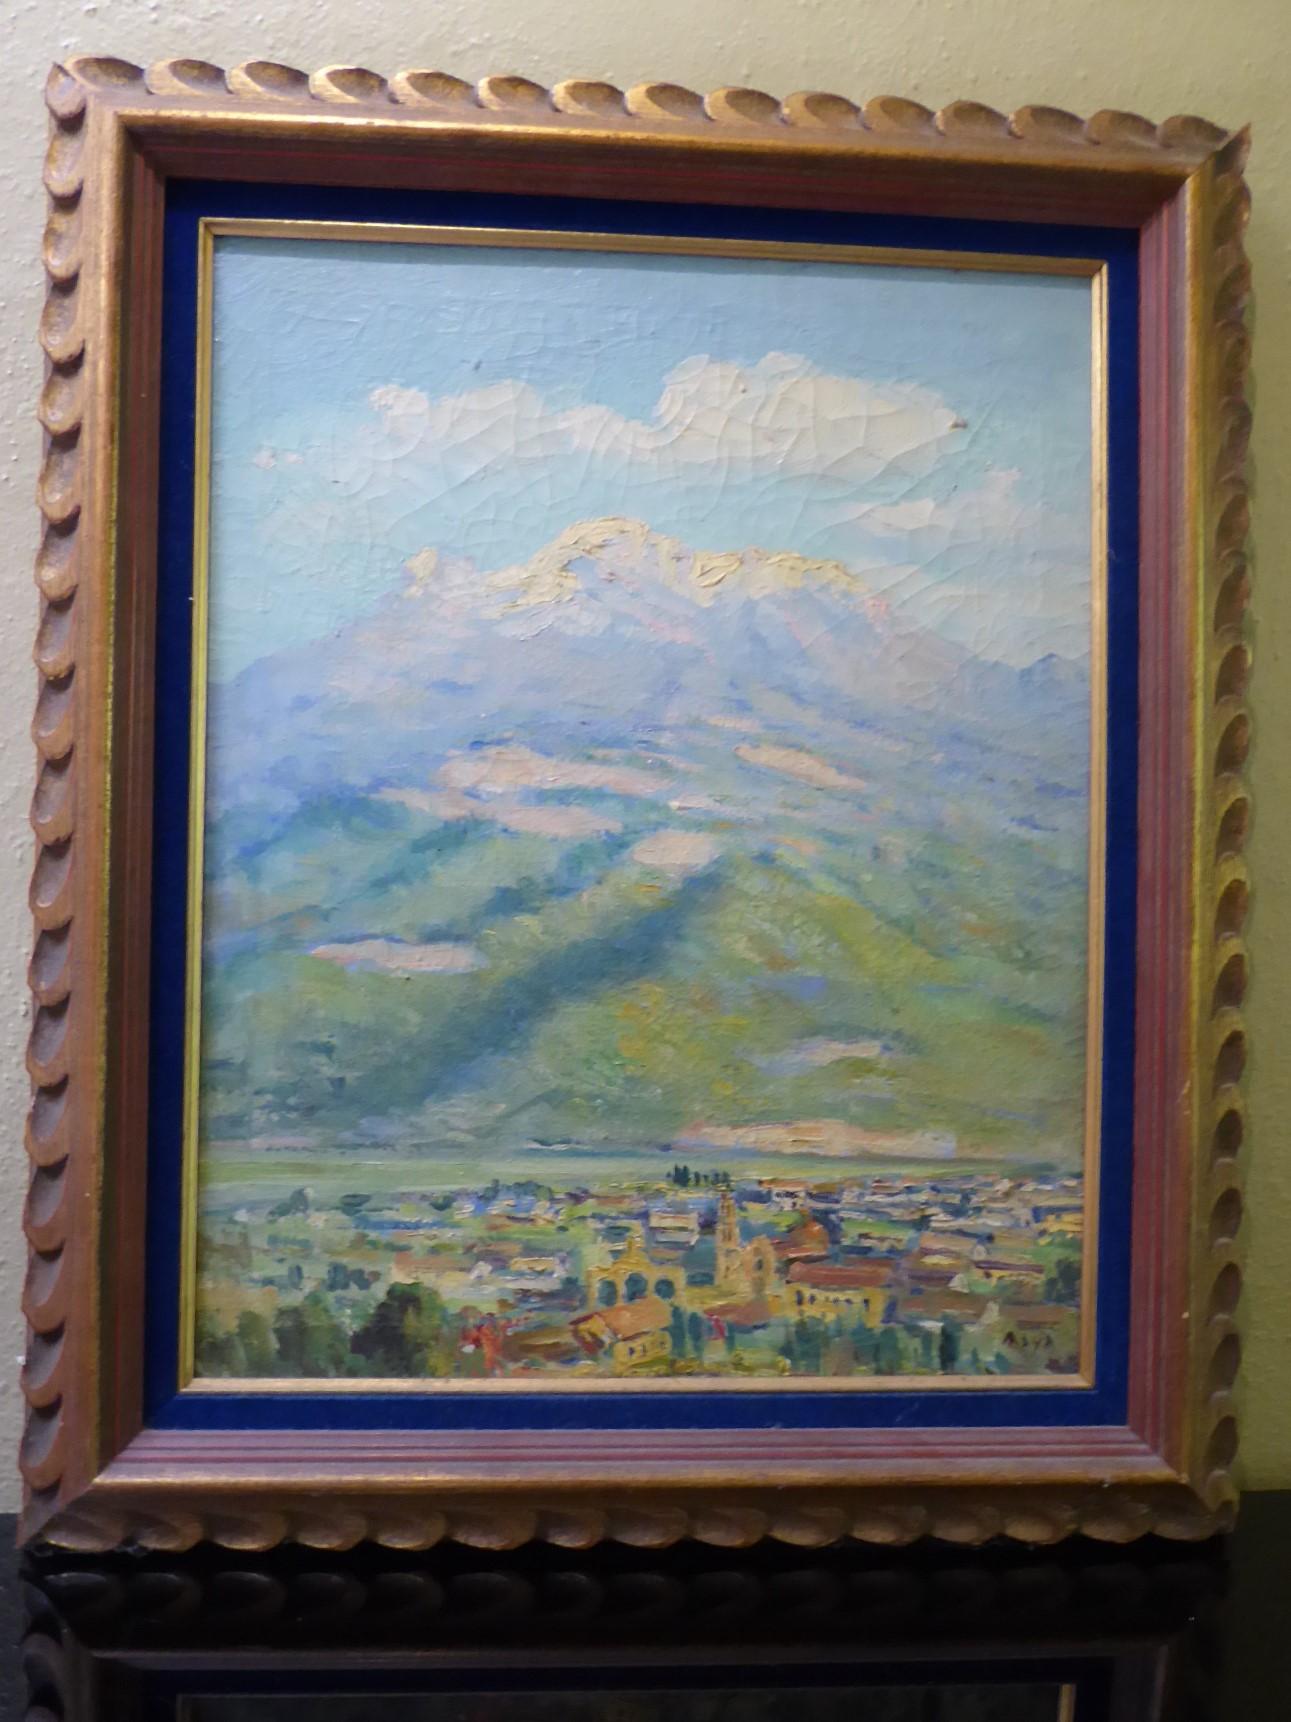 Vintage Reynaldo Maya (1911-Mexico) Landscape oil on canvas painting of Mexican town in the distance and  snow coverd mountains (volcanos) in the background. Bold brush strokes with a soft muted color palette. In the original hand carved